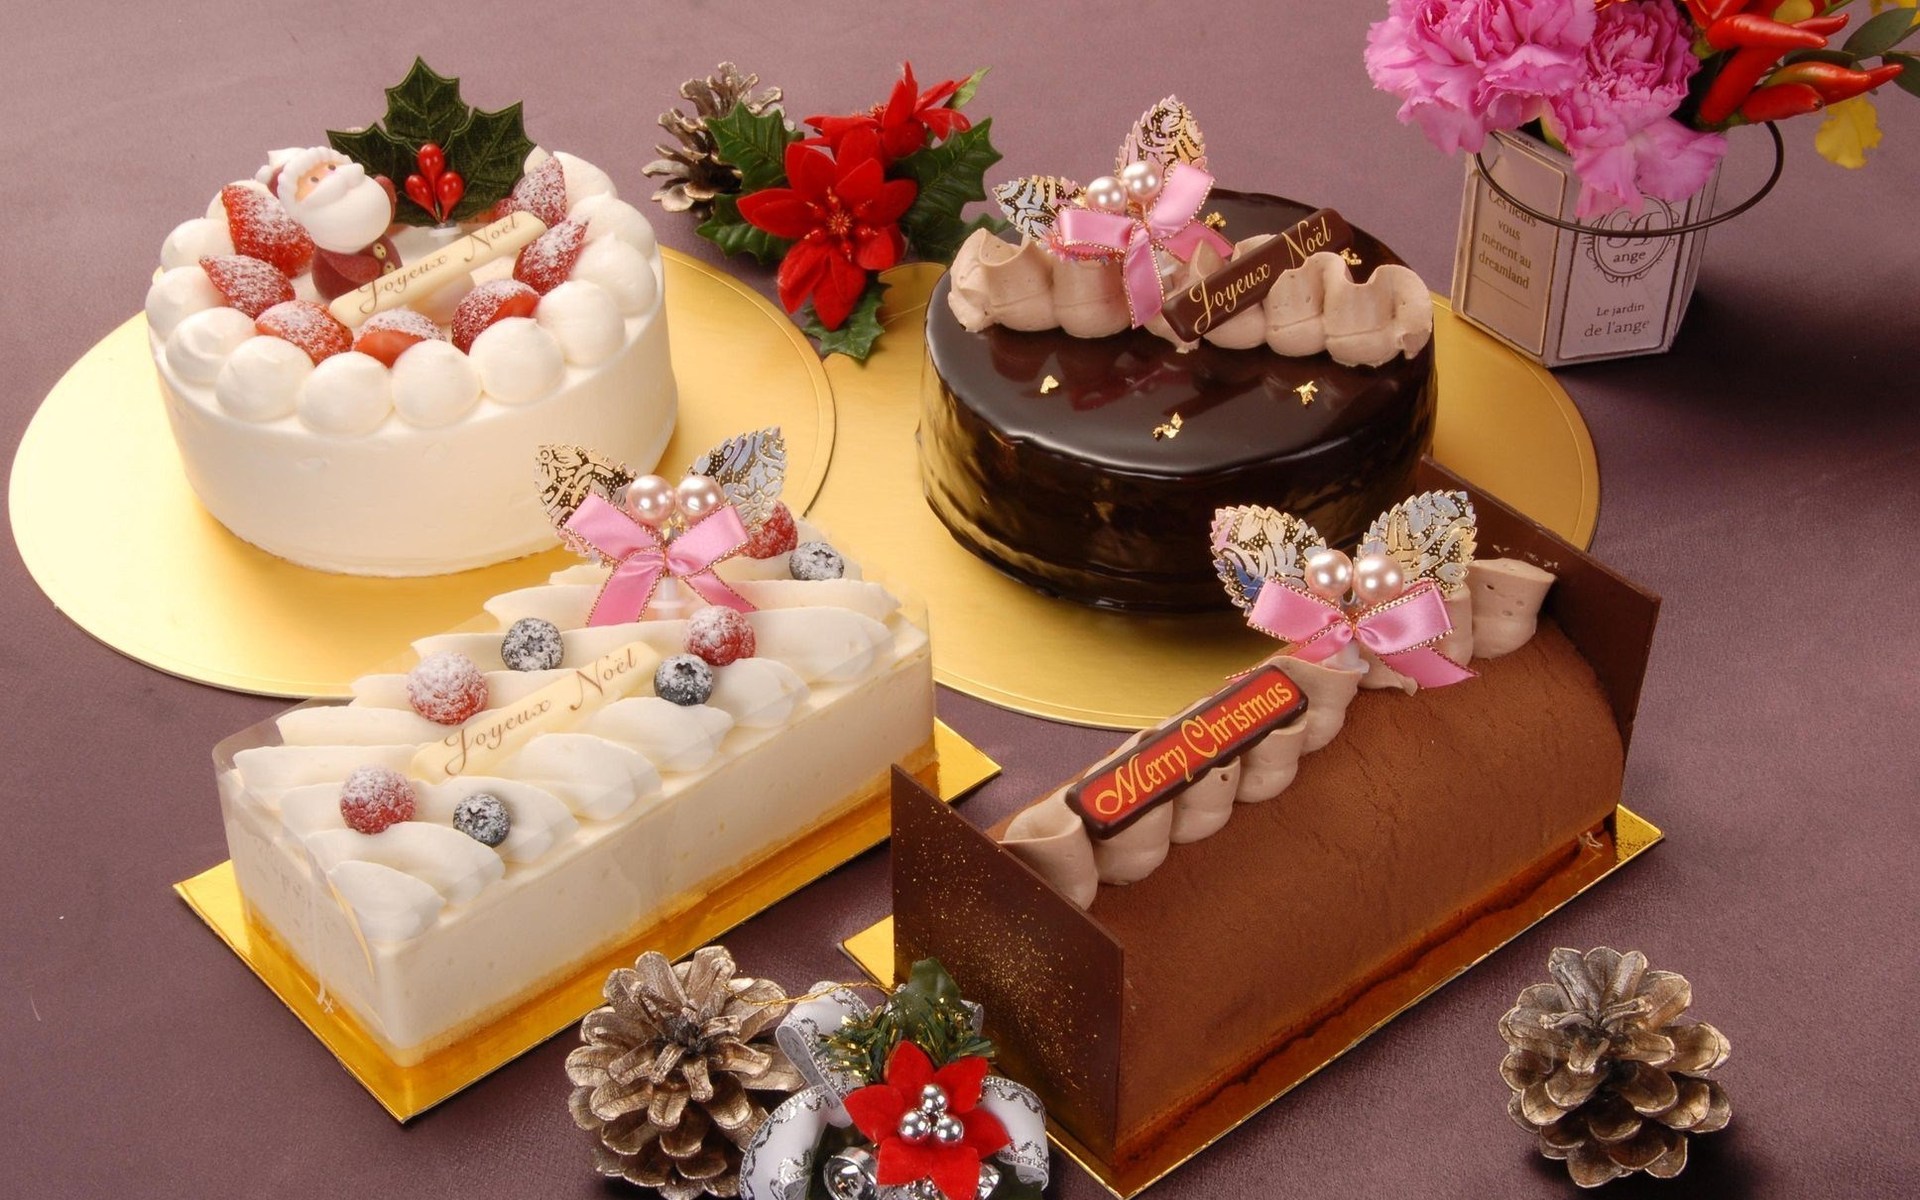 Cake HD Wallpaper Cakes Image High Resolution